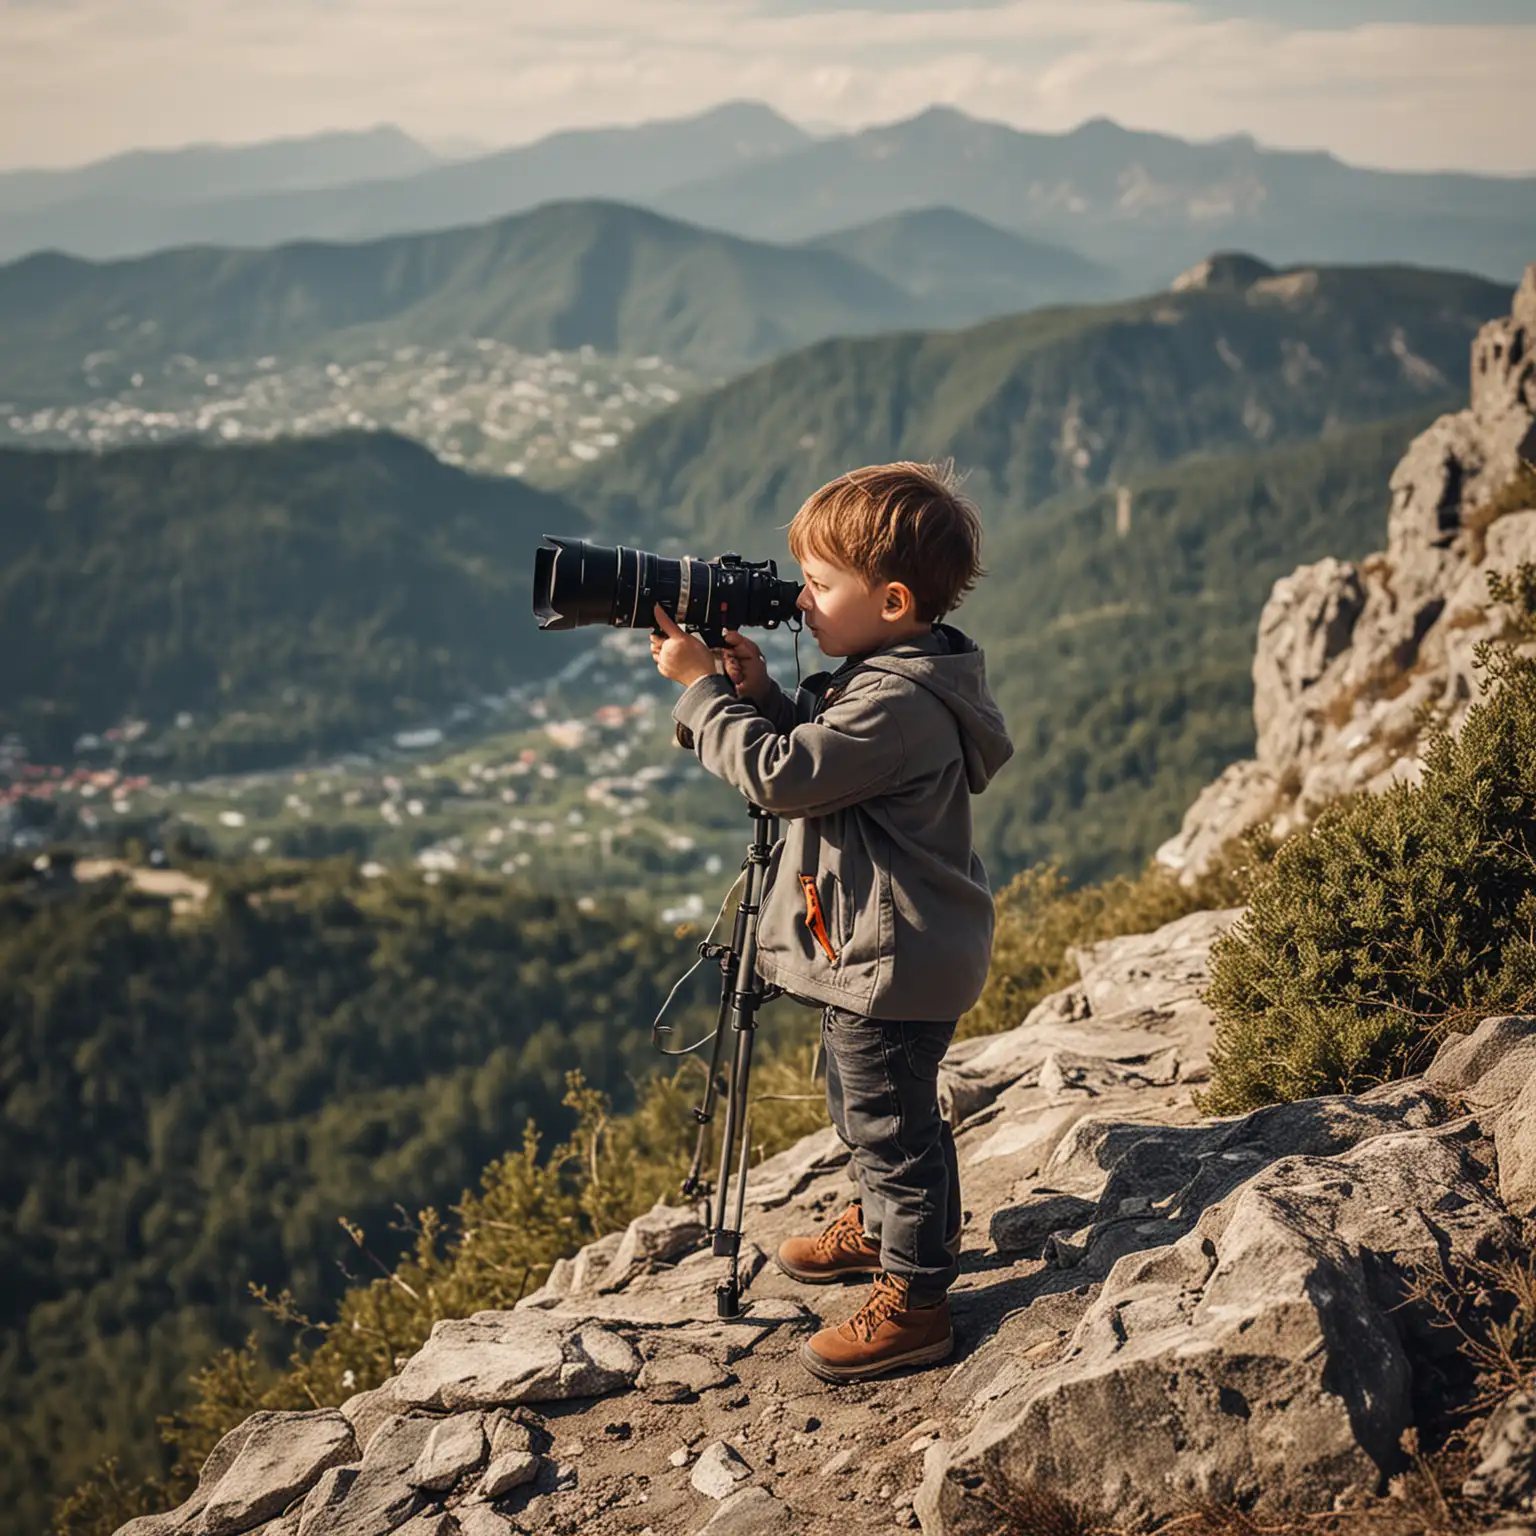 little man with a big camera and lens on a mountain top.